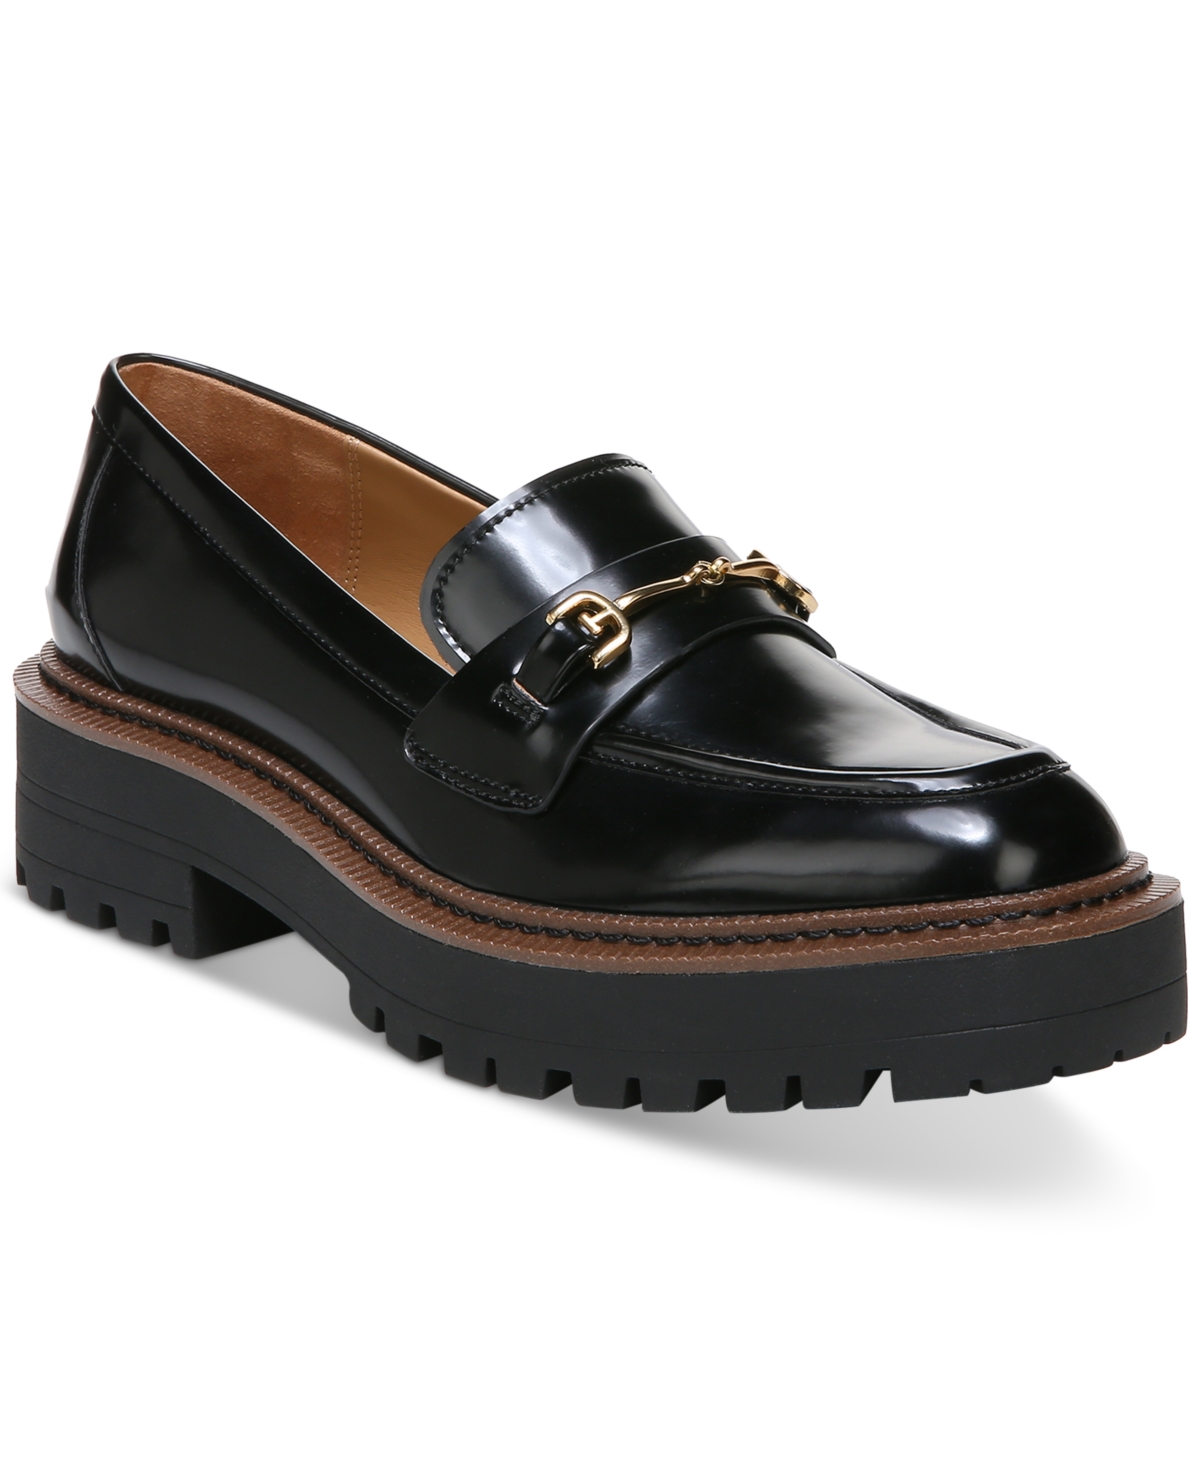 Shop Sam Edelman Women's Laurs Lug-sole Tailored Loafer Flats In Black Leather